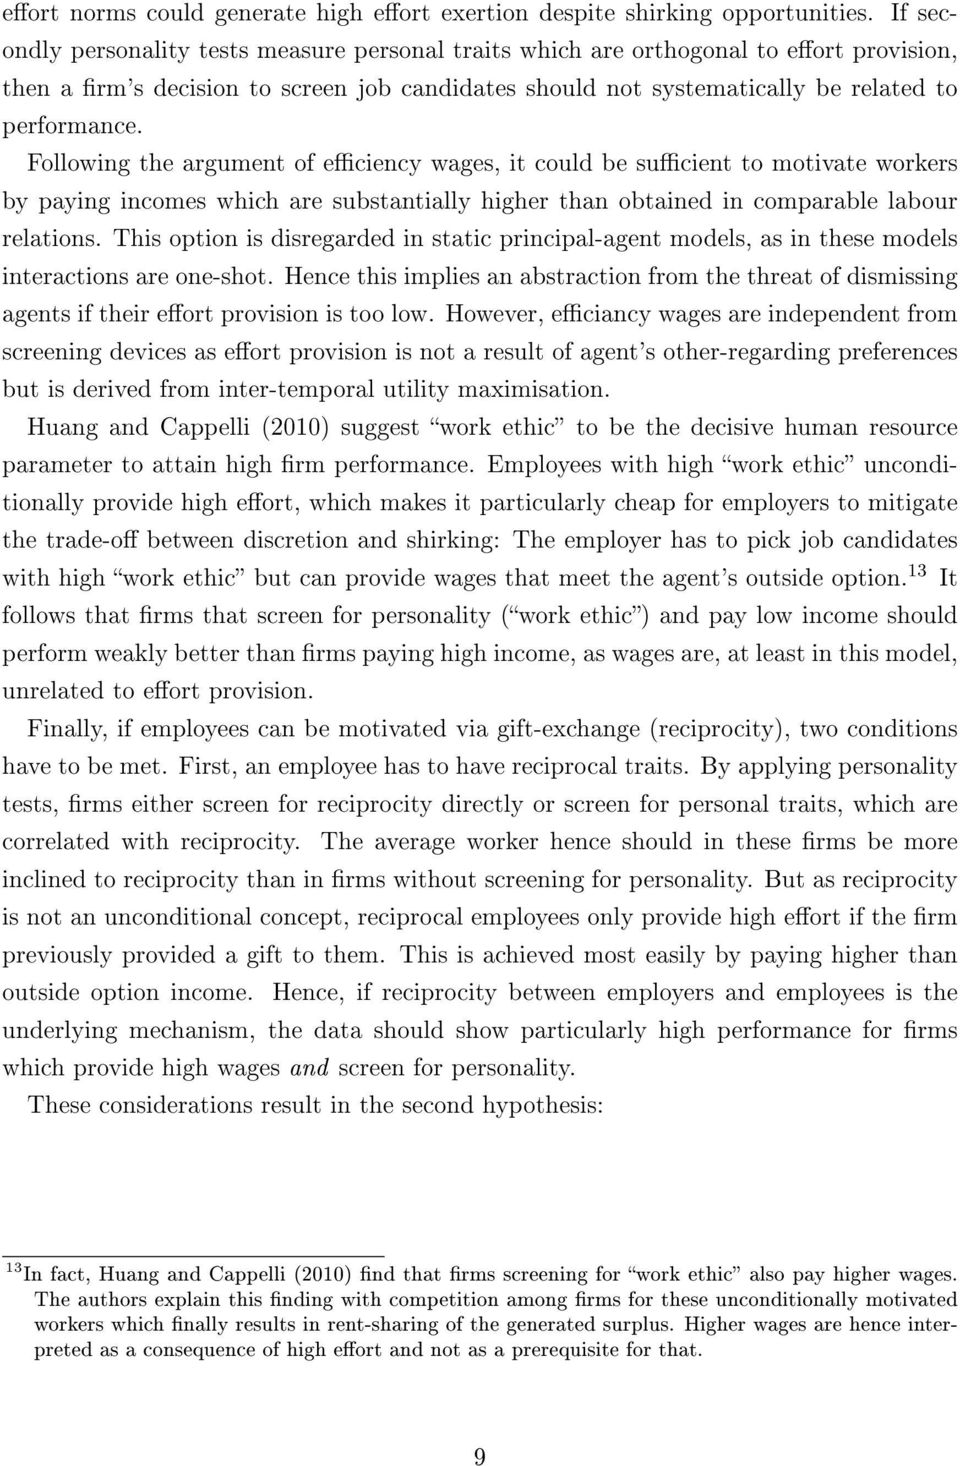 Following the argument of eciency wages, it could be sucient to motivate workers by paying incomes which are substantially higher than obtained in comparable labour relations.